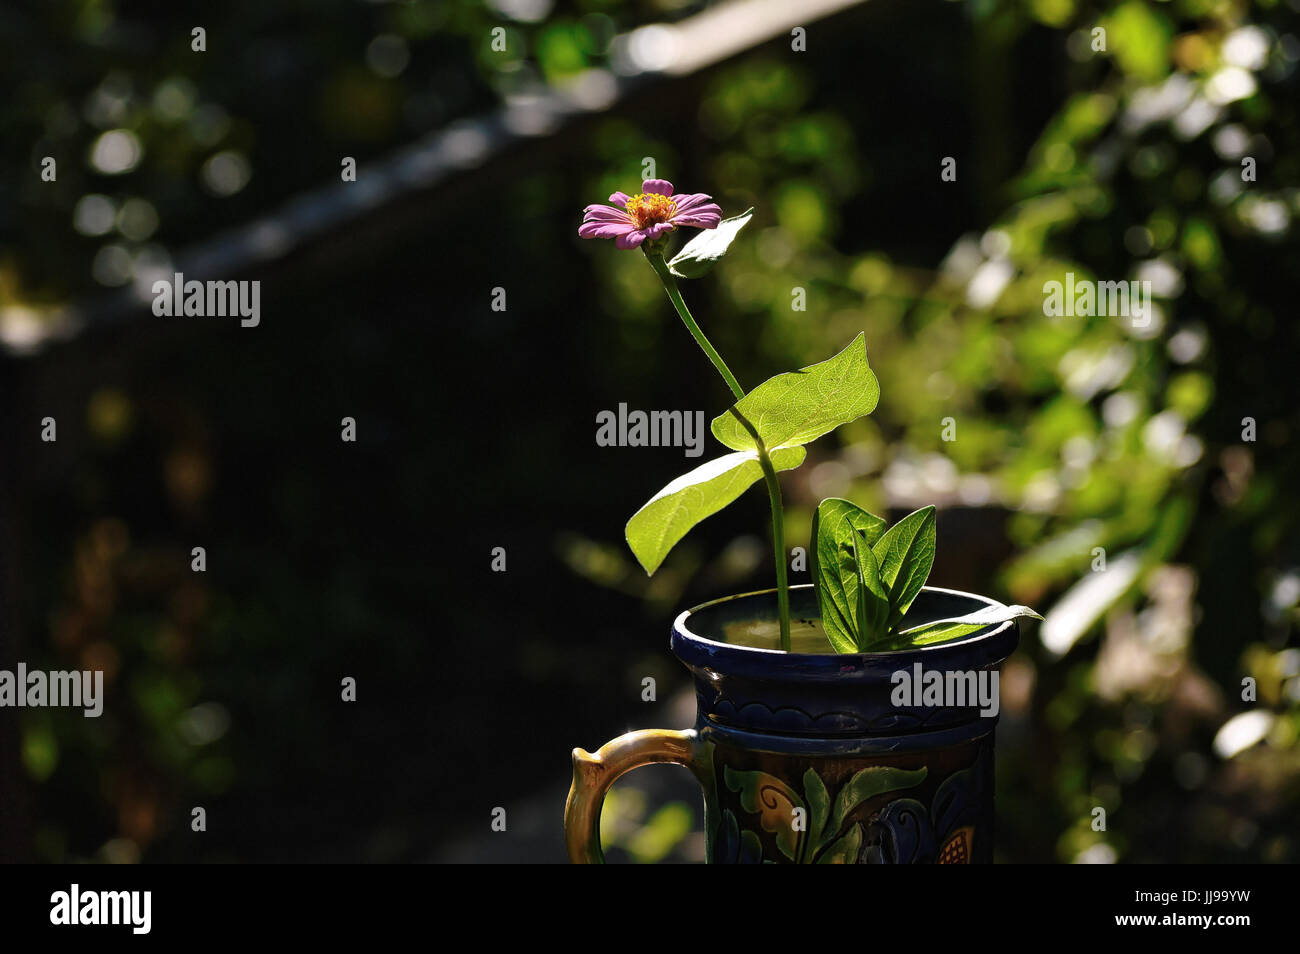 Little pink flower in a traditional vase against dark blurred background Stock Photo